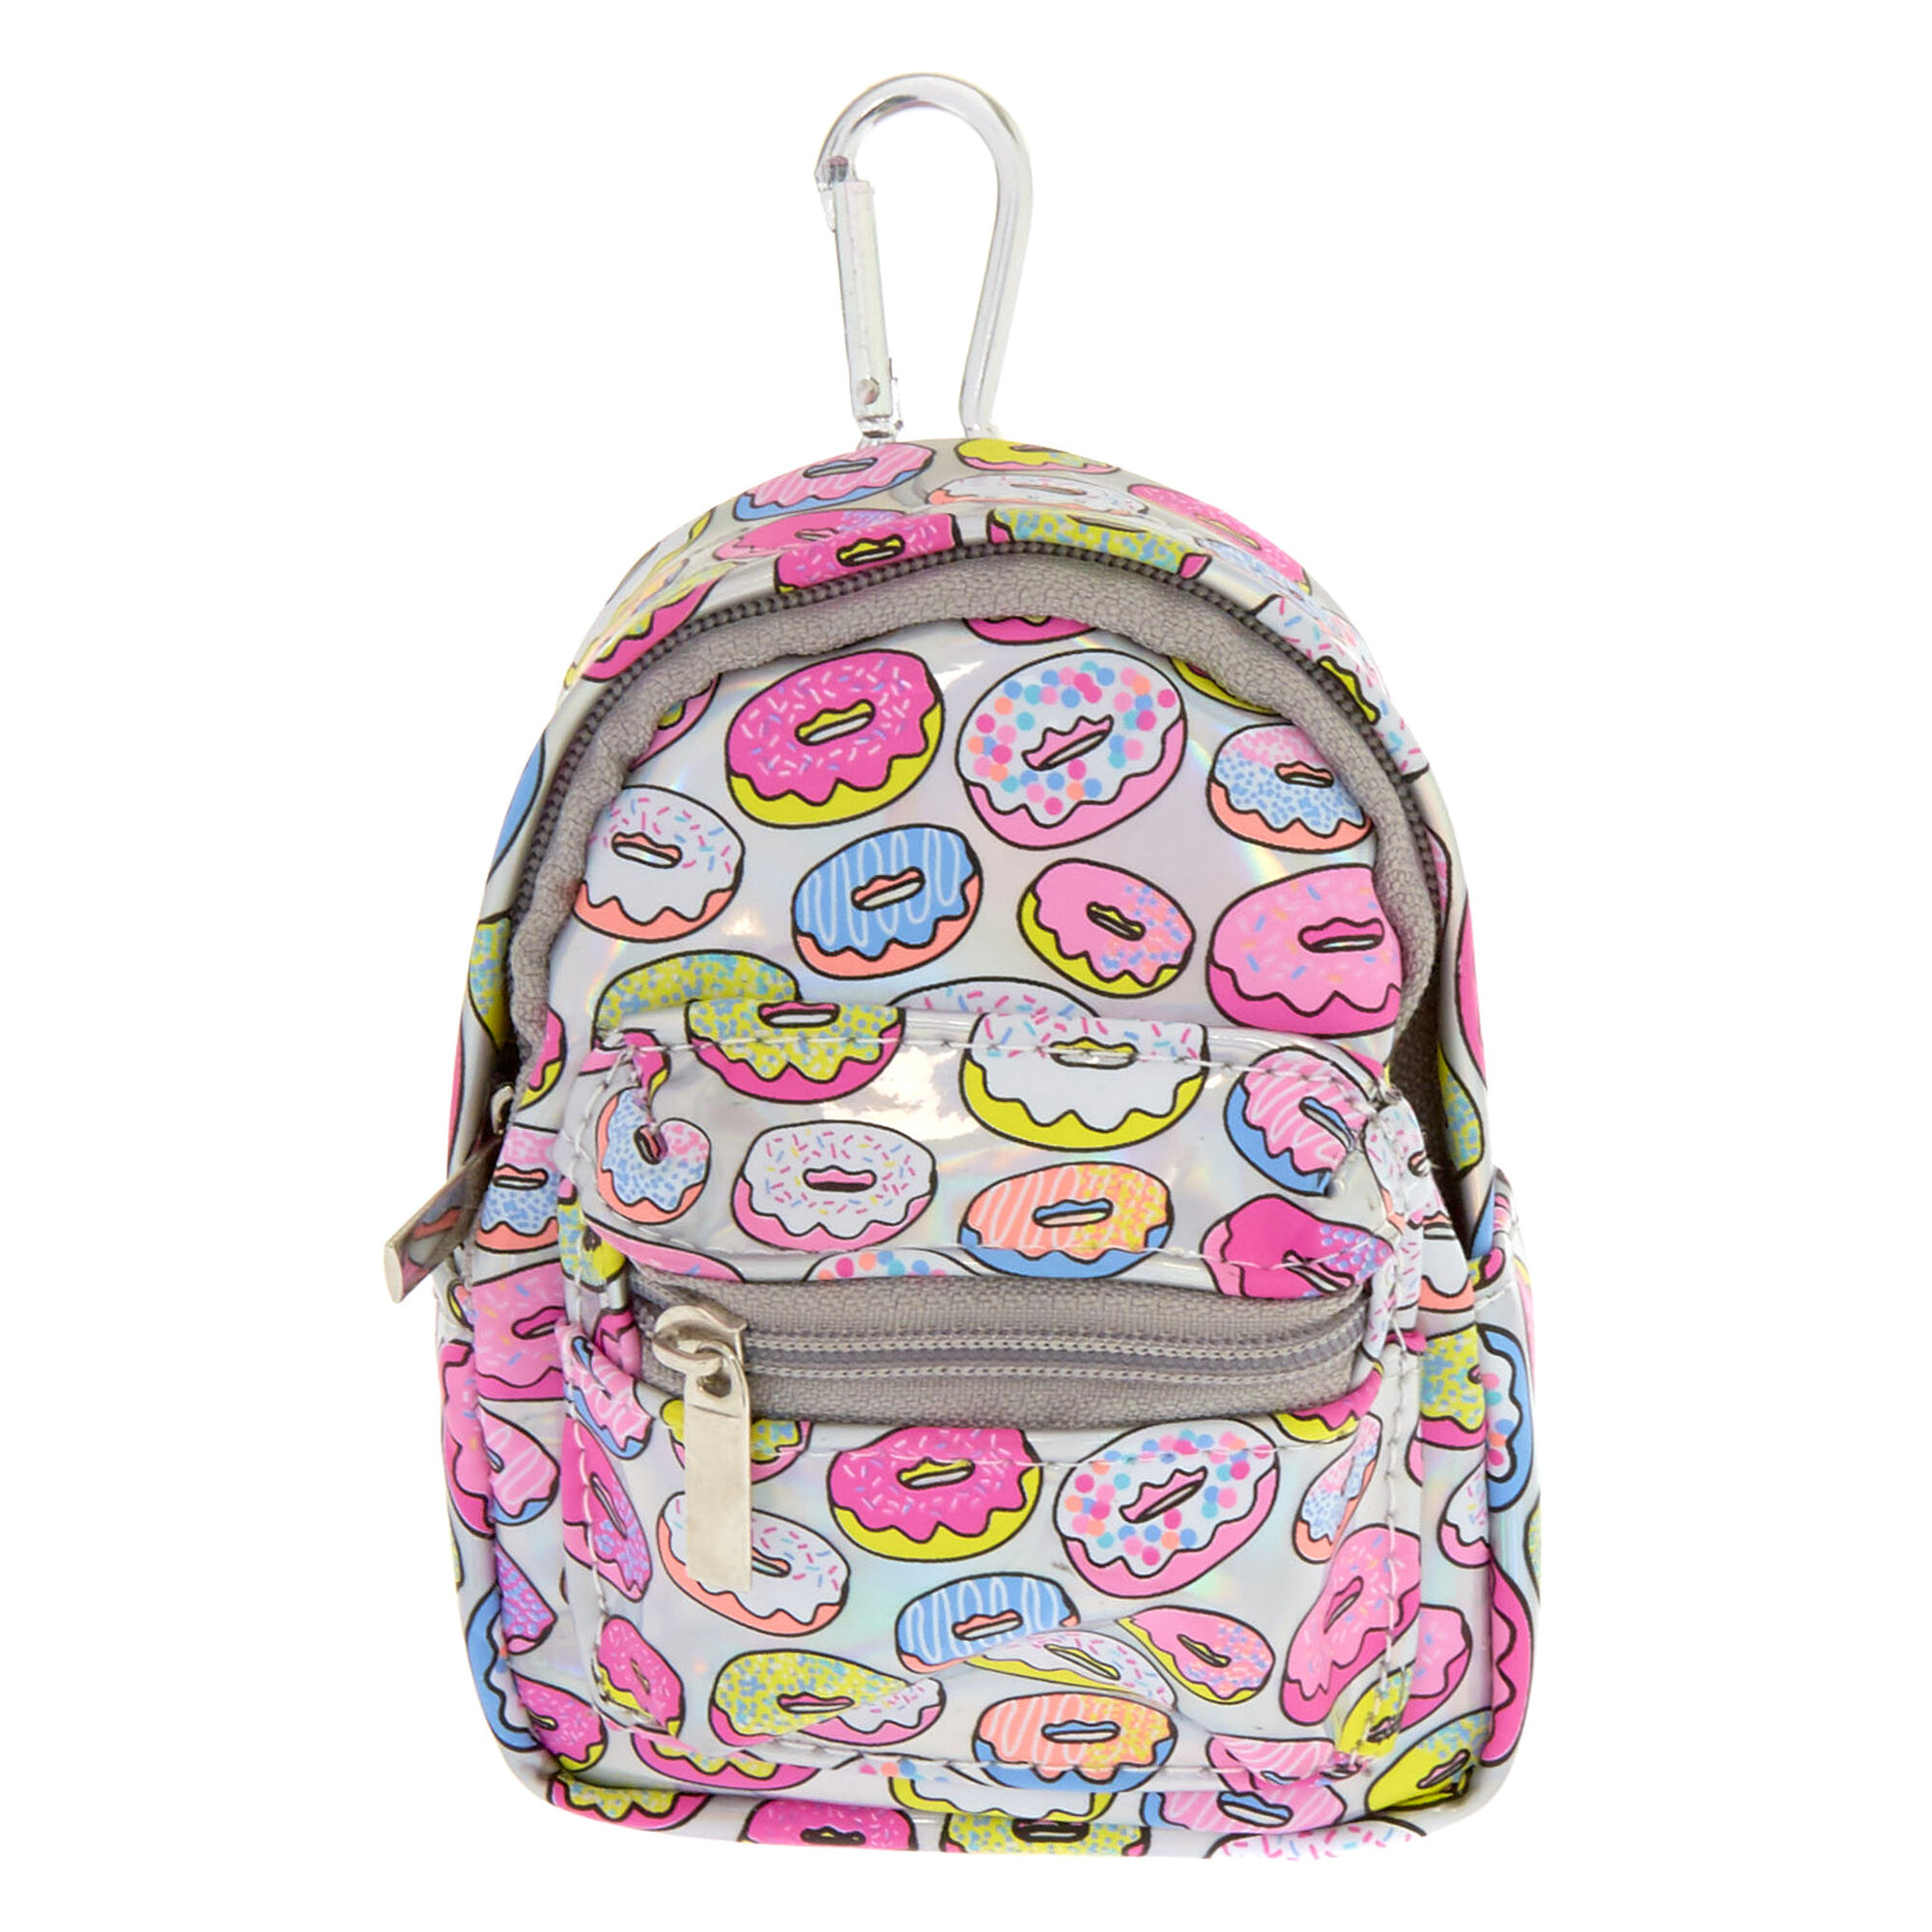 Holographic Donut Mini Backpack Keychain Coin Purse ...